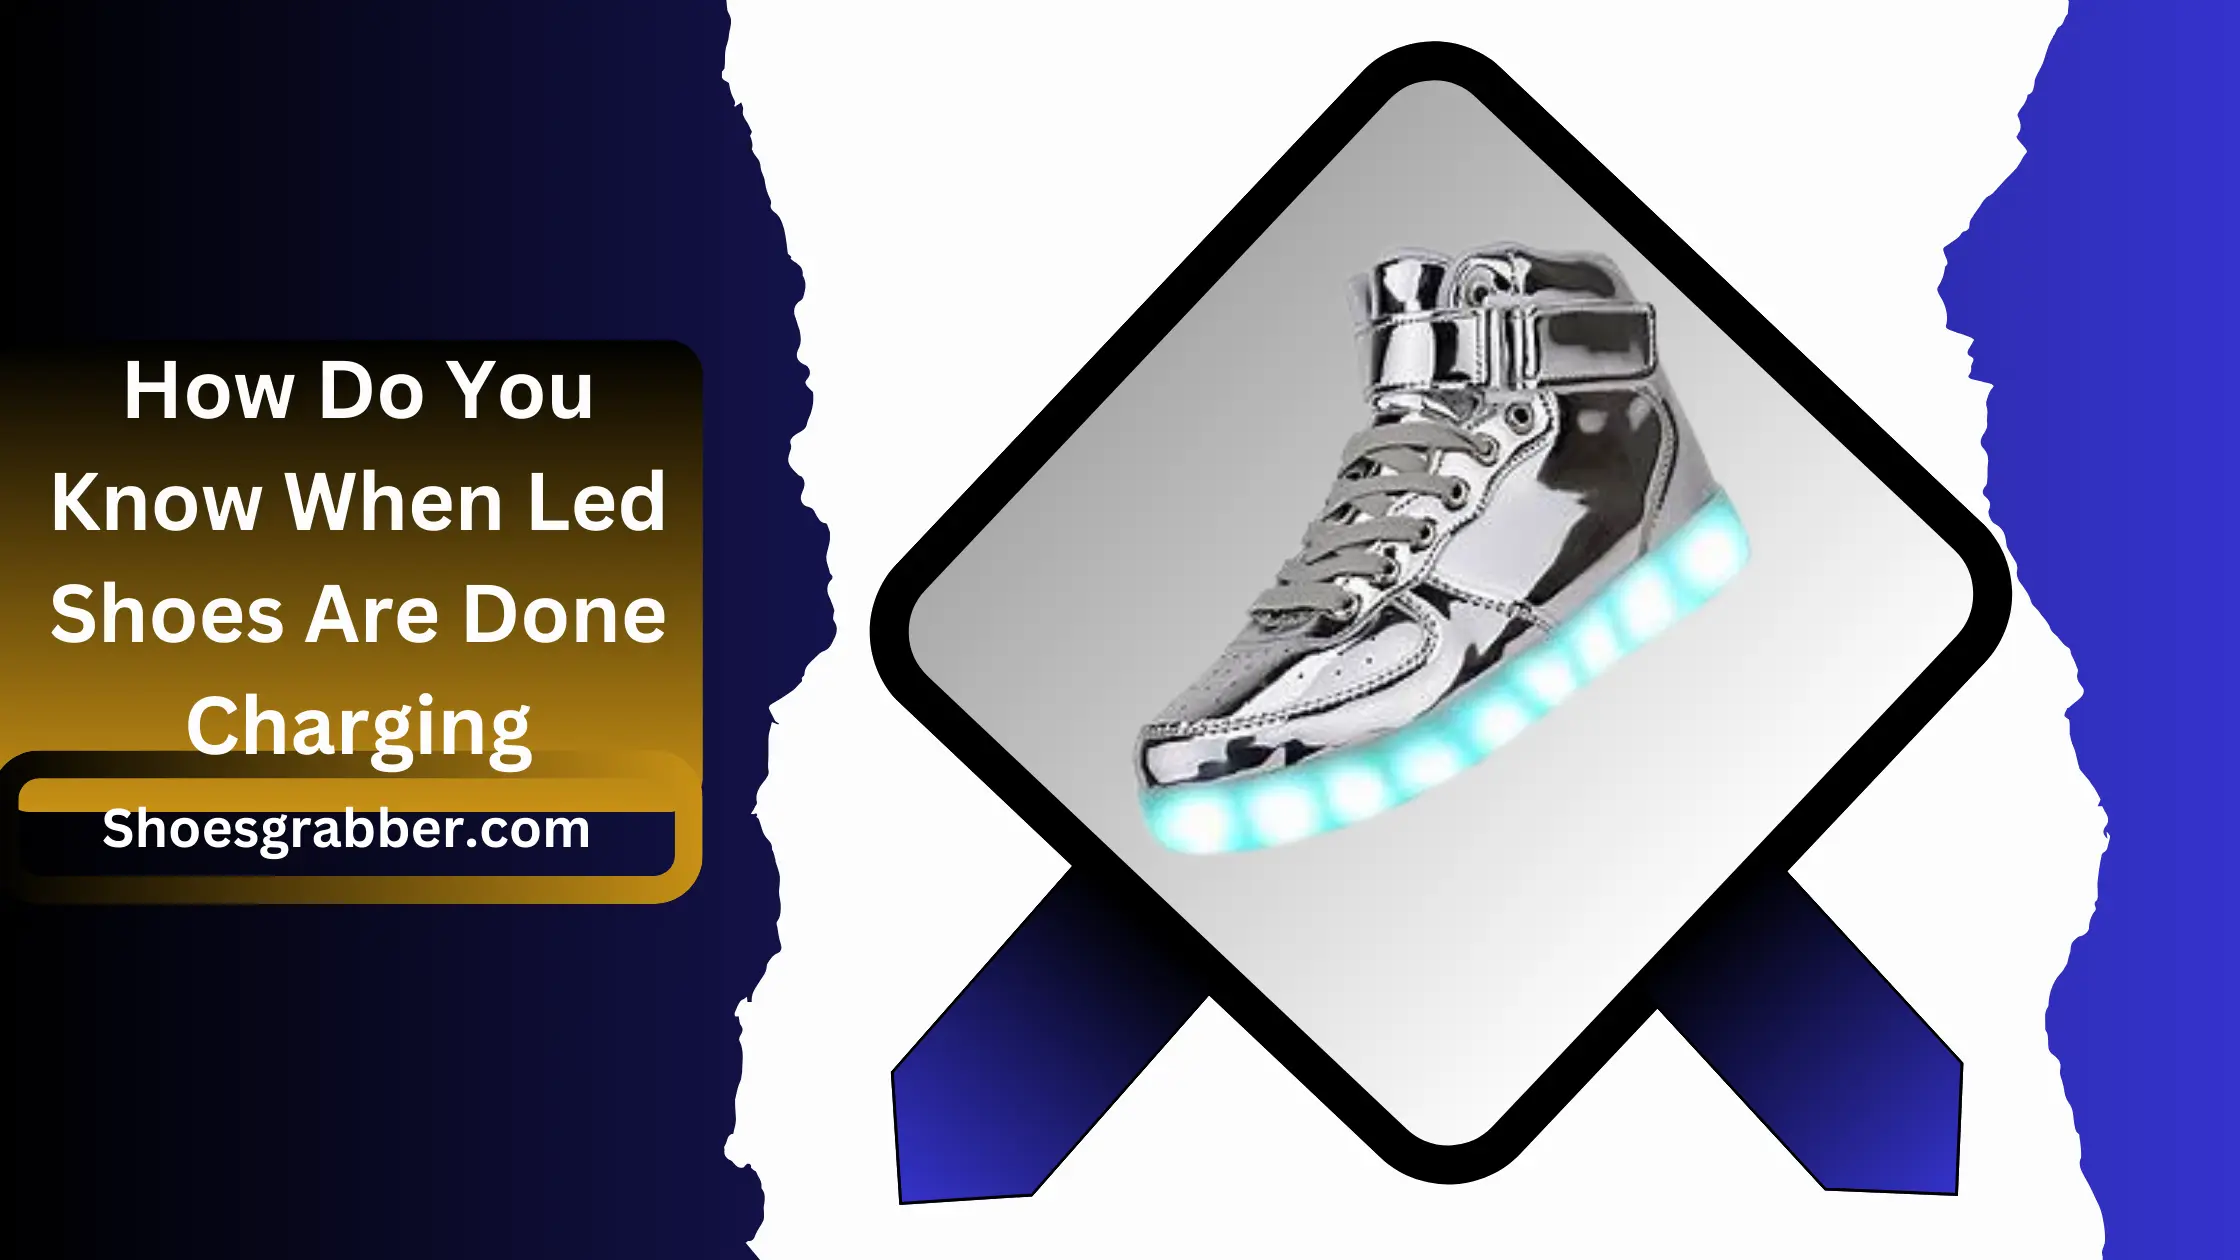 How Do You Know When Led Shoes Are Done Charging - The Definitive Guide